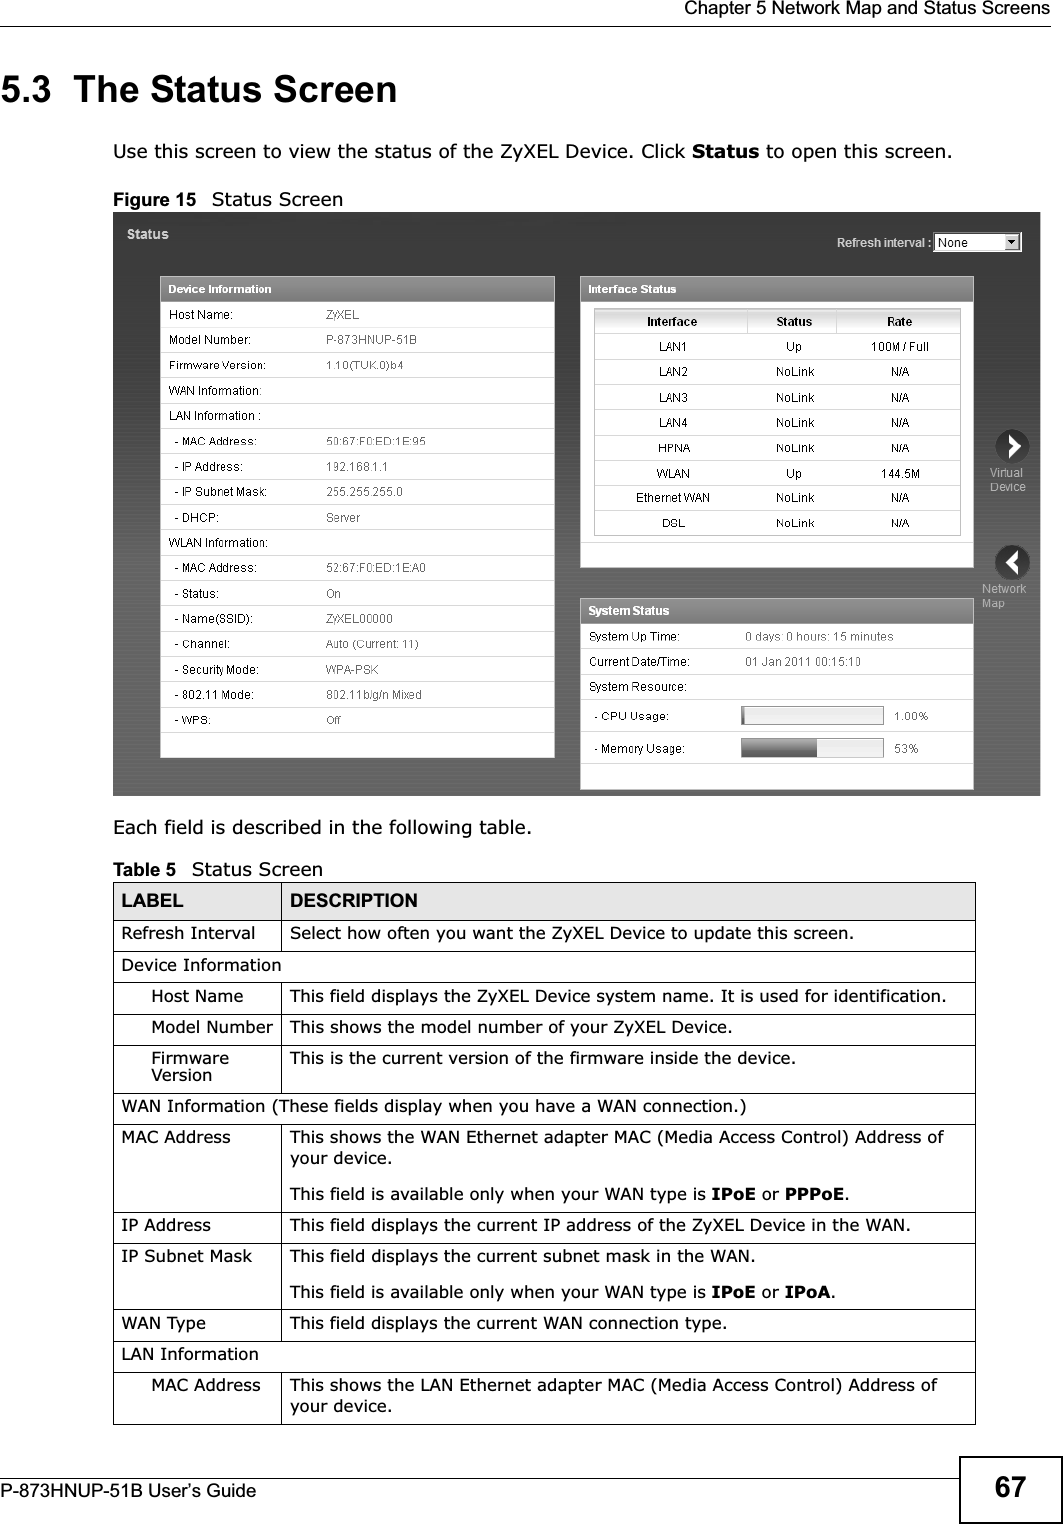  Chapter 5 Network Map and Status ScreensP-873HNUP-51B User’s Guide 675.3  The Status Screen Use this screen to view the status of the ZyXEL Device. Click Status to open this screen.Figure 15   Status ScreenEach field is described in the following table.Table 5   Status ScreenLABEL DESCRIPTIONRefresh Interval Select how often you want the ZyXEL Device to update this screen.Device InformationHost Name This field displays the ZyXEL Device system name. It is used for identification. Model Number This shows the model number of your ZyXEL Device.Firmware Version This is the current version of the firmware inside the device. WAN Information (These fields display when you have a WAN connection.)MAC Address This shows the WAN Ethernet adapter MAC (Media Access Control) Address of your device.This field is available only when your WAN type is IPoE or PPPoE.IP Address This field displays the current IP address of the ZyXEL Device in the WAN.IP Subnet Mask This field displays the current subnet mask in the WAN.This field is available only when your WAN type is IPoE or IPoA.WAN Type This field displays the current WAN connection type.LAN InformationMAC Address This shows the LAN Ethernet adapter MAC (Media Access Control) Address of your device.